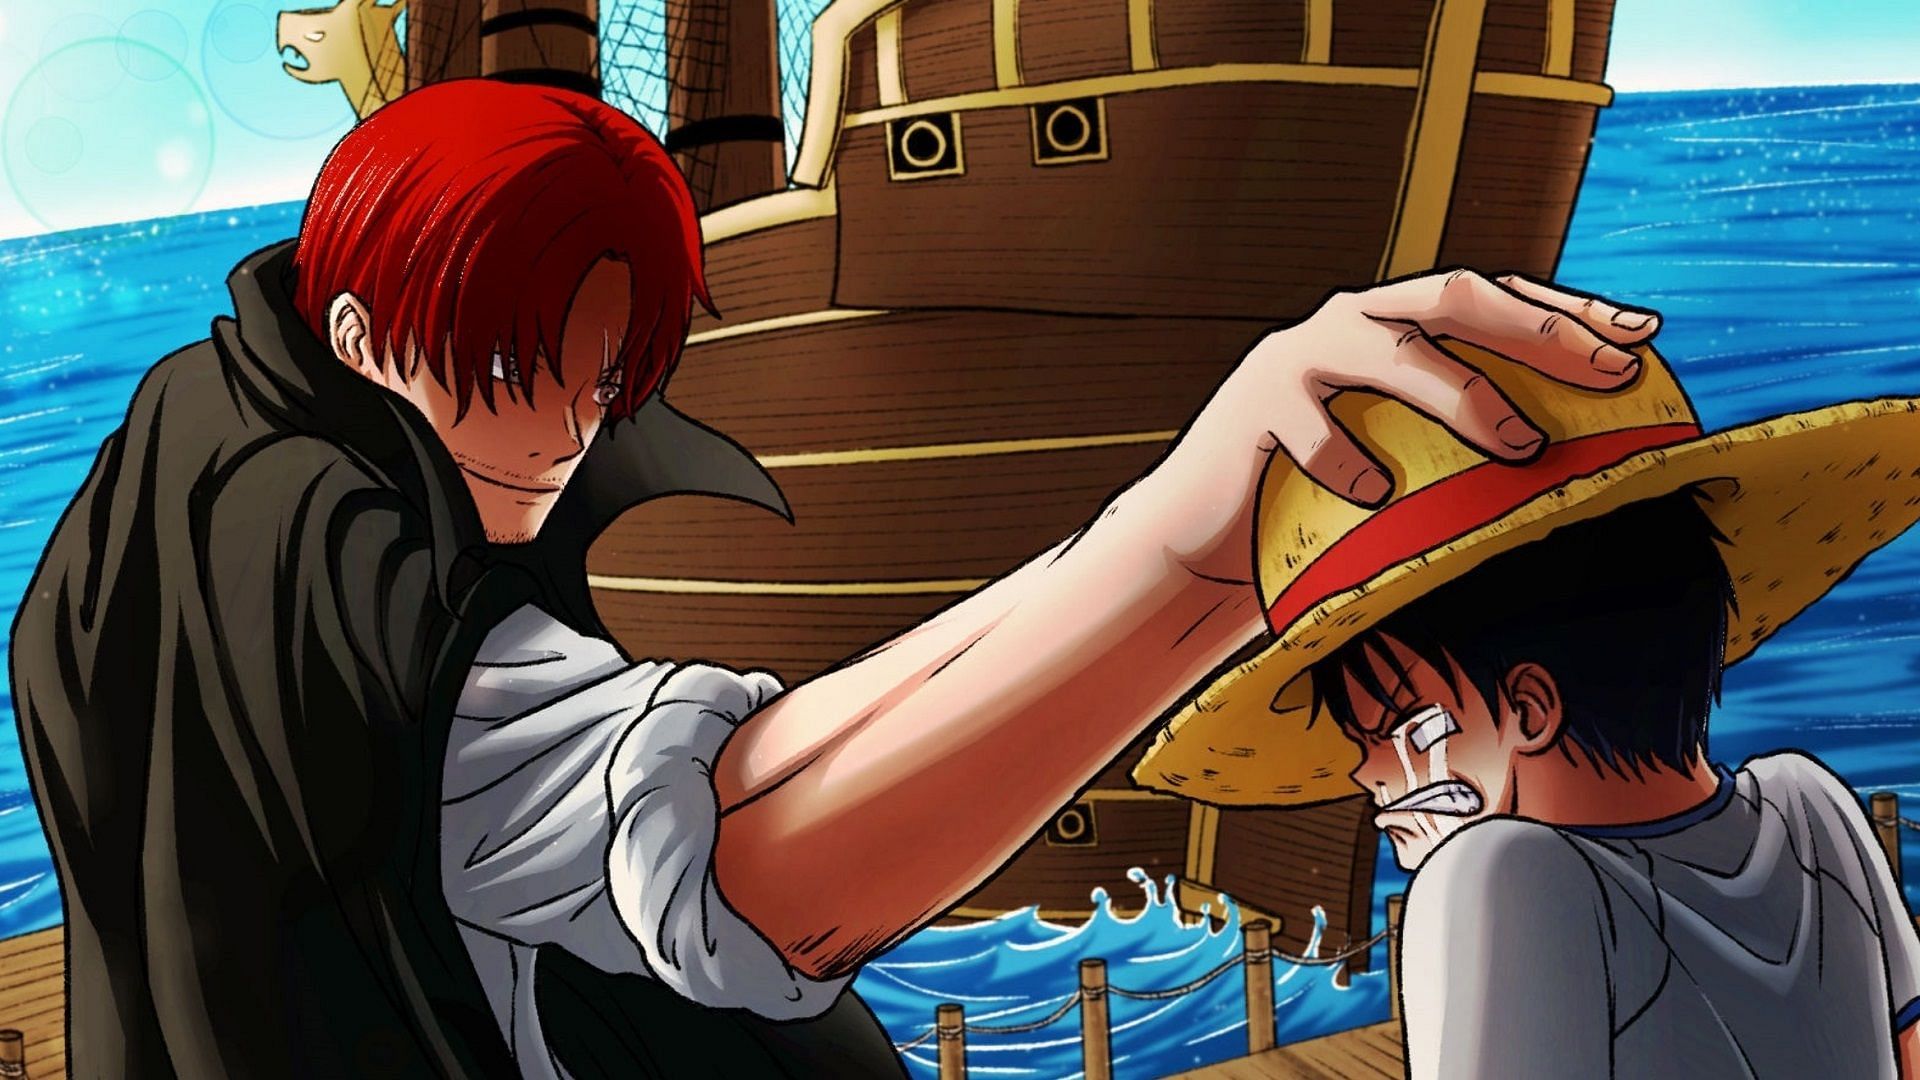 Shanks is the one who inspired Luffy to become a pirate and start his adventure (Image via Eiichiro Oda/Shueisha, One Piece)